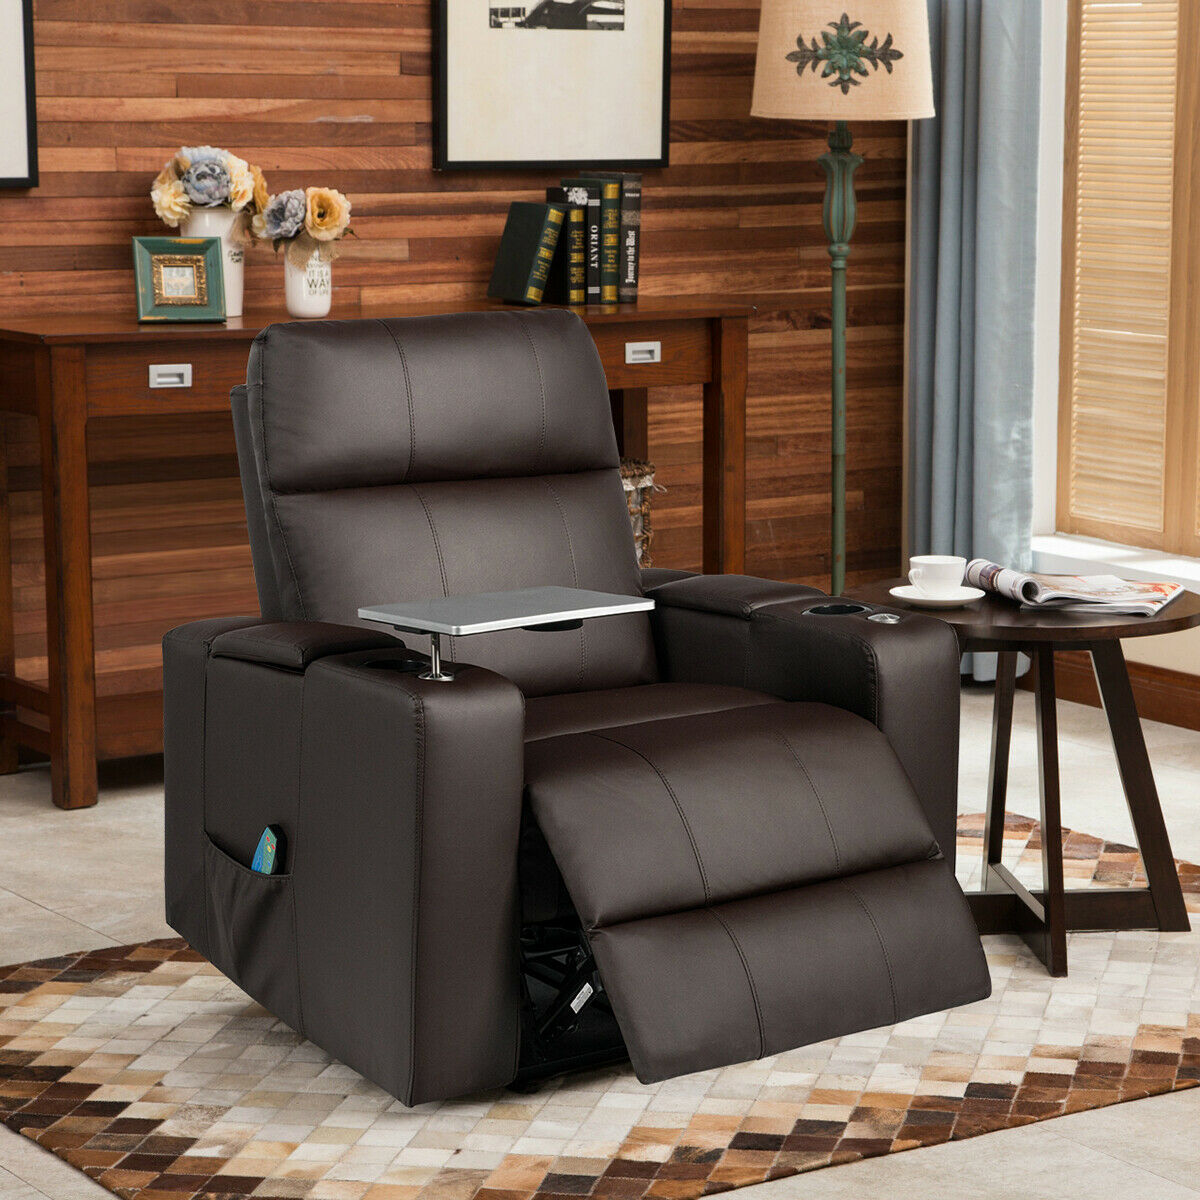 Gymax Massage Theater Recliner...